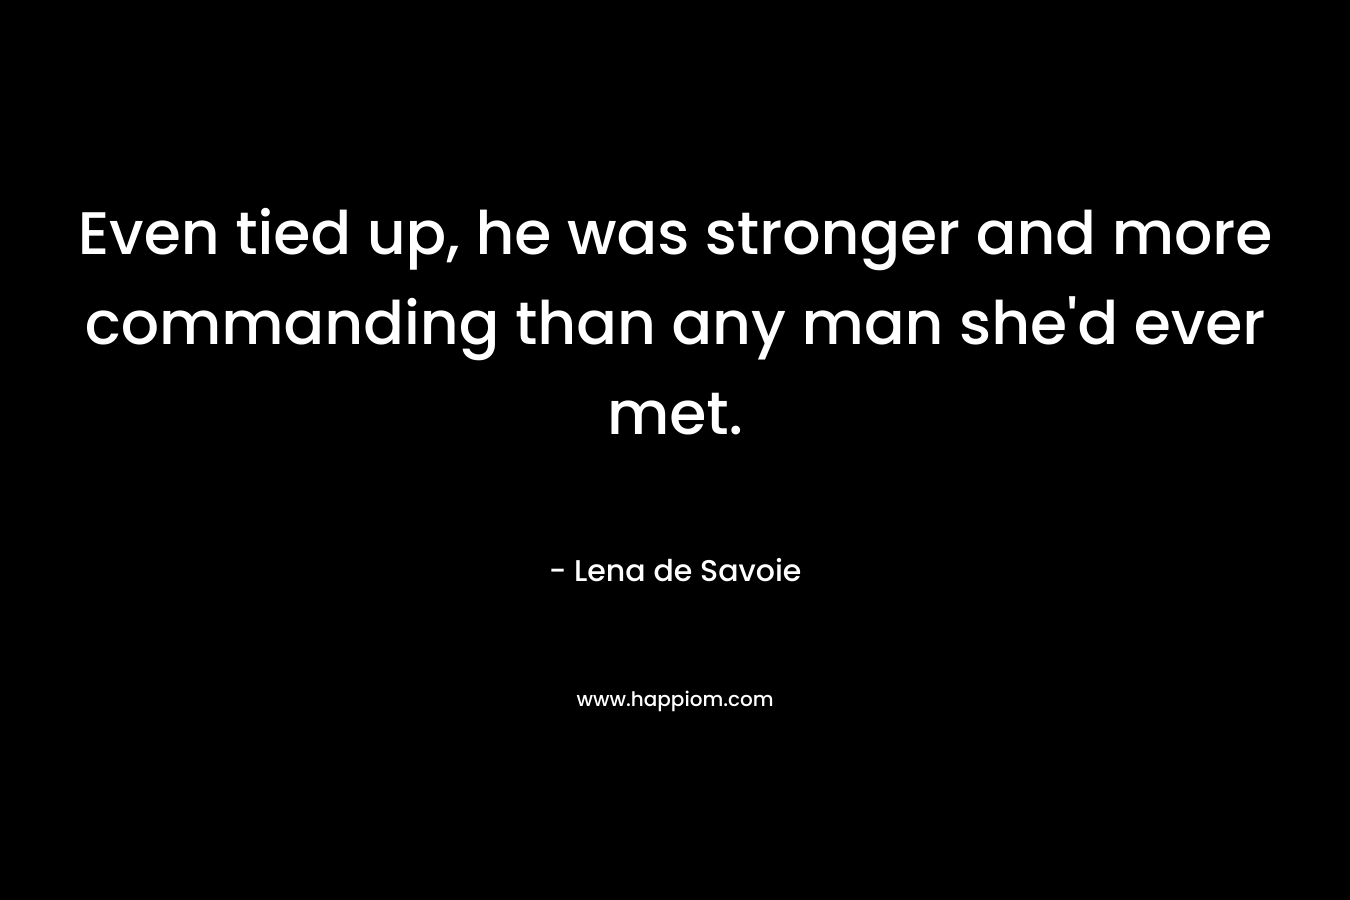 Even tied up, he was stronger and more commanding than any man she’d ever met. – Lena de Savoie